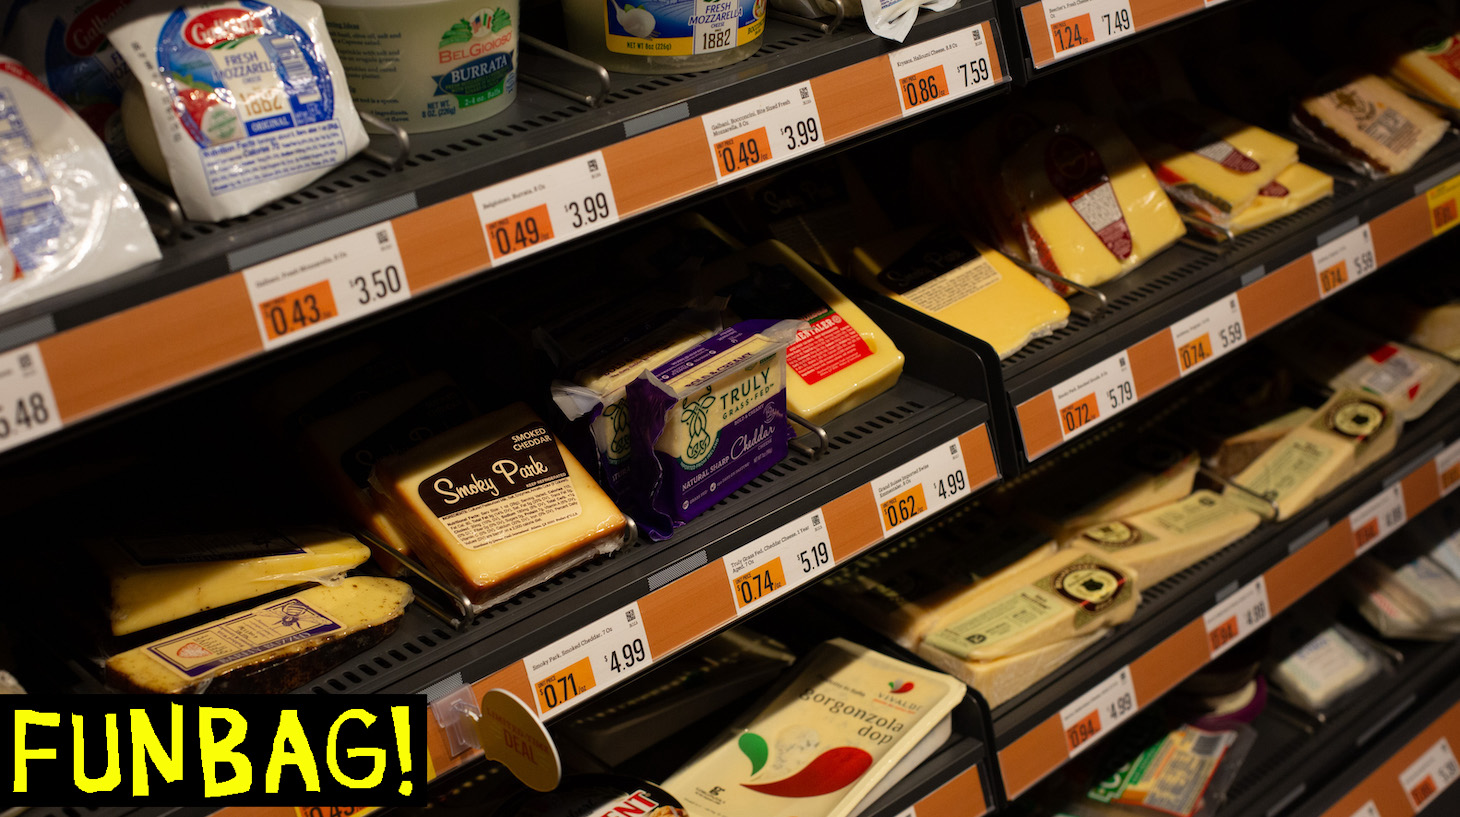 SEATTLE, WA - FEBRUARY 26: Cheese is displayed for sale at Amazon Go Grocery on February 26, 2020 in Seattle, Washington. The store in Seattles Capitol Hill neighborhood is Amazons first large retail grocery location that uses the cashier-free model. (Photo by David Ryder/Getty Images)